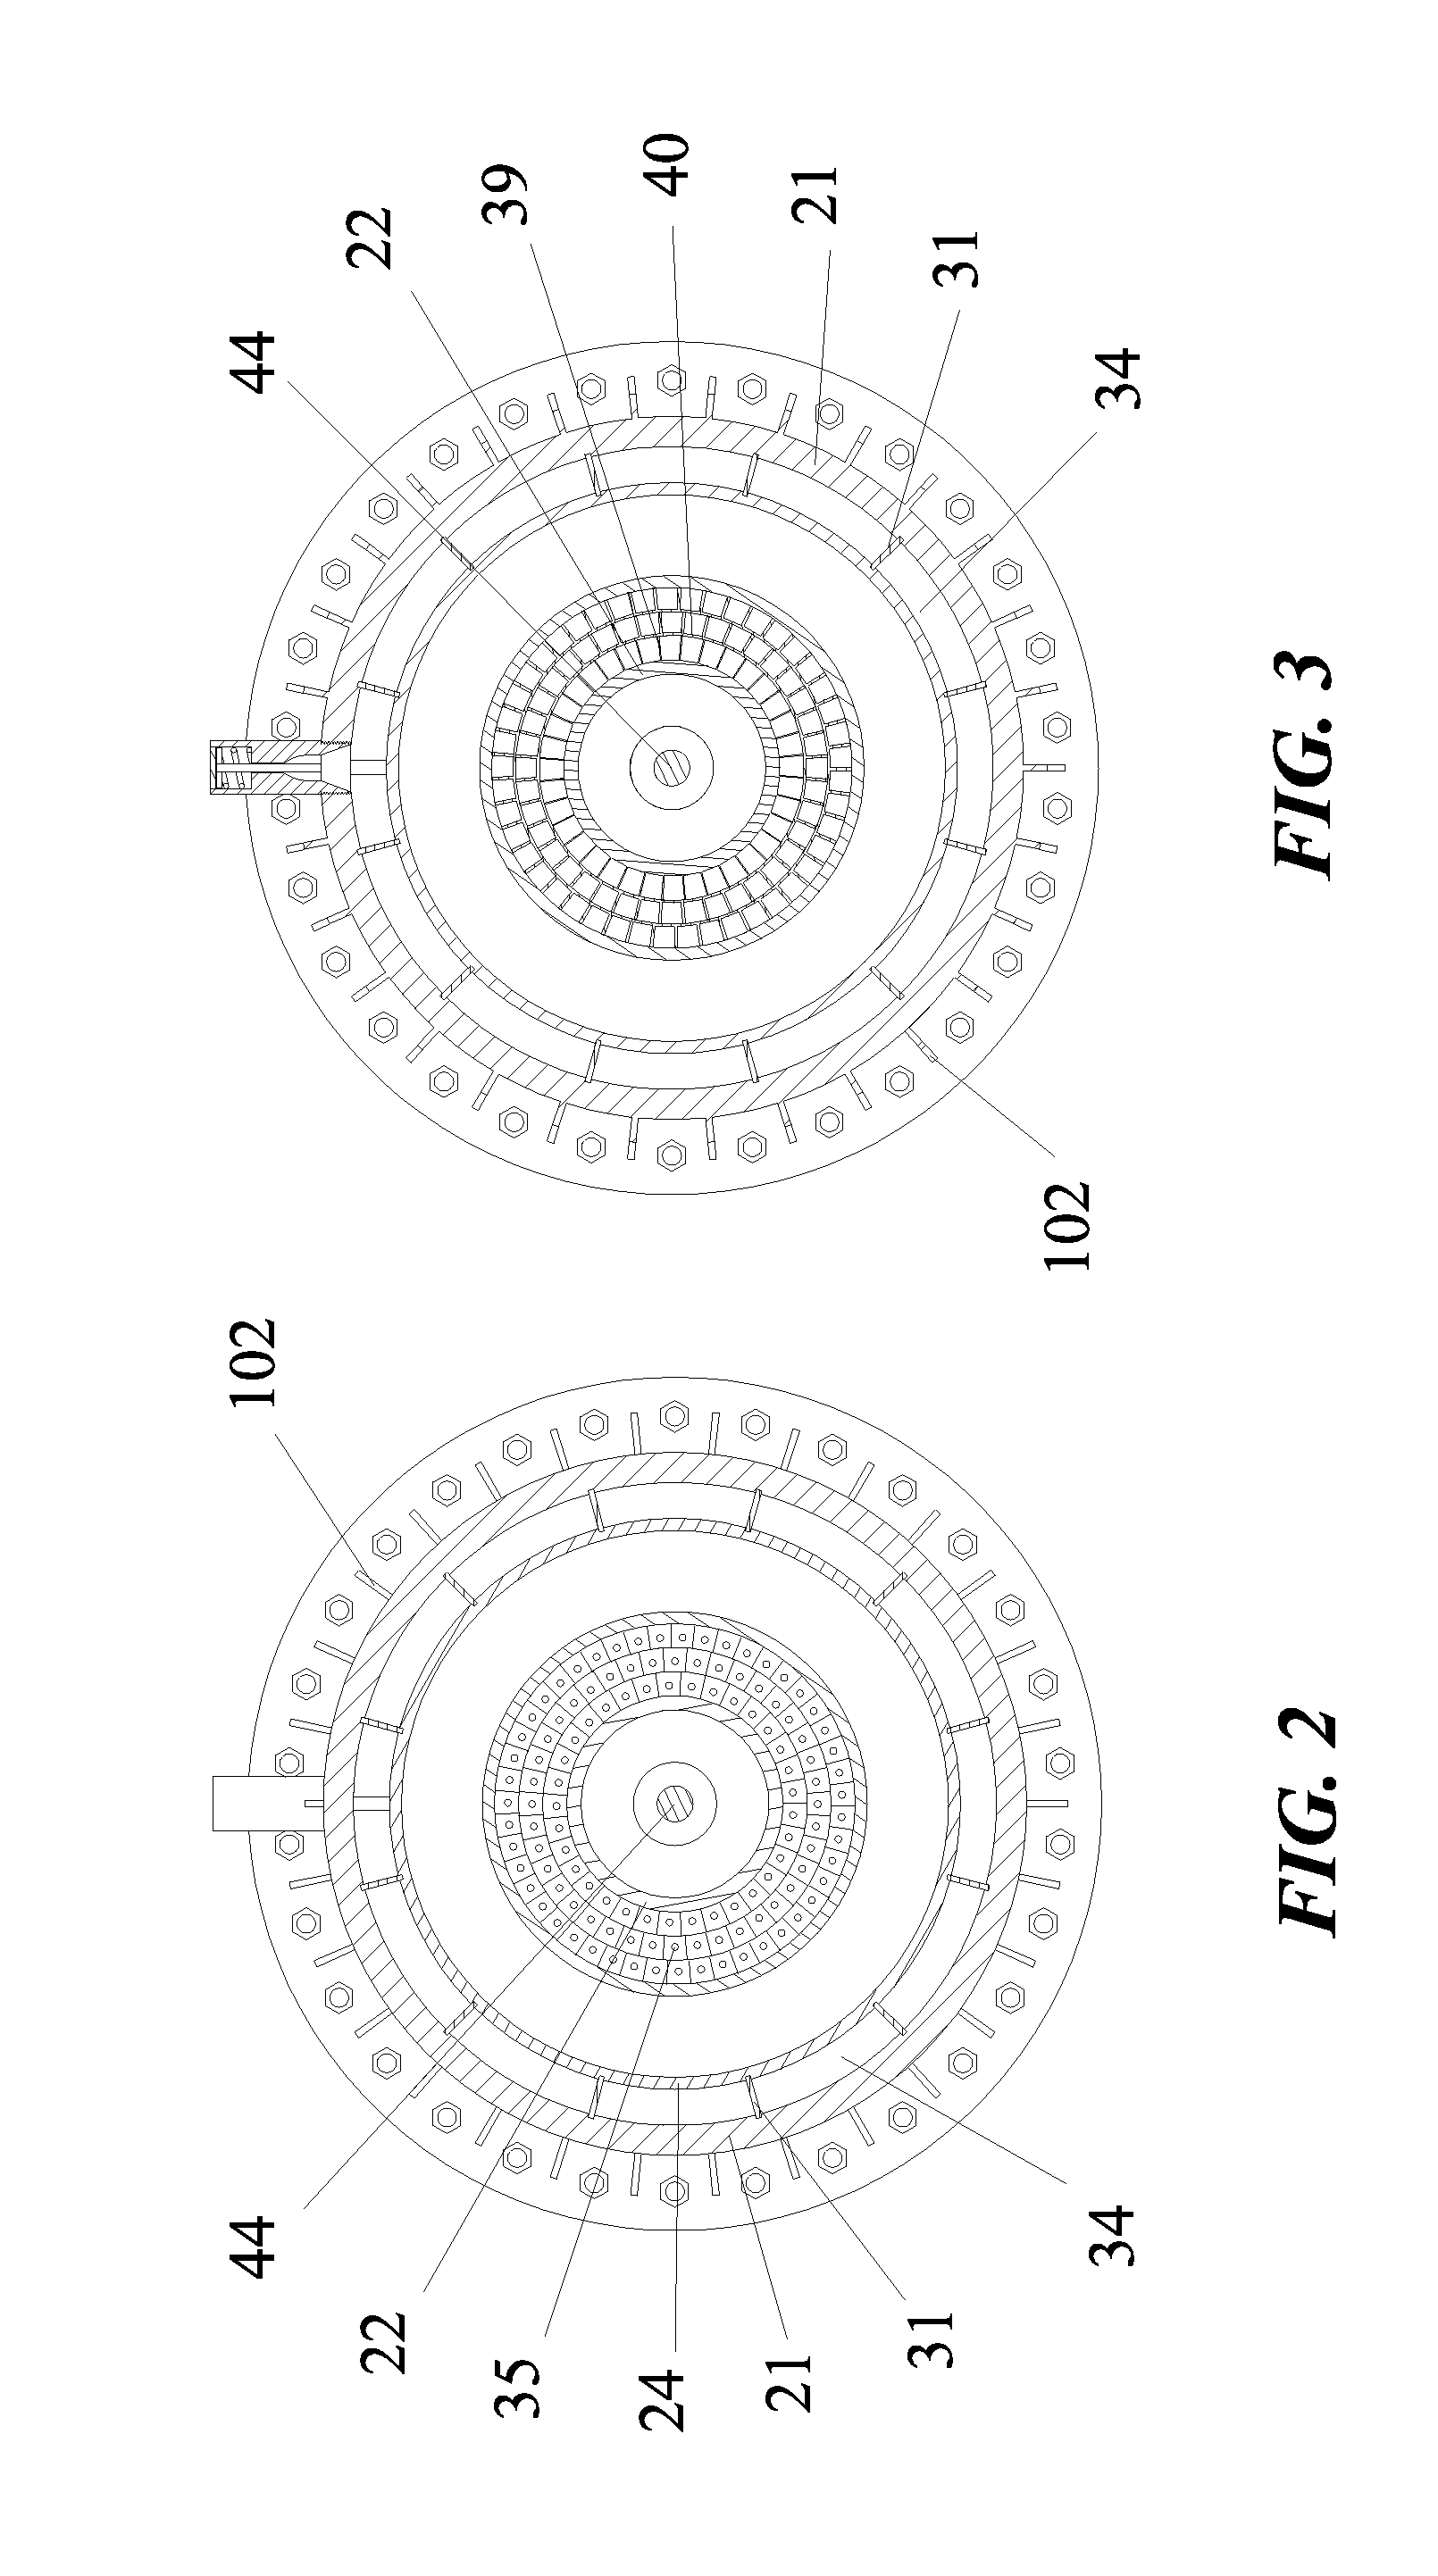 Closed-cycle hydro-jet thruster